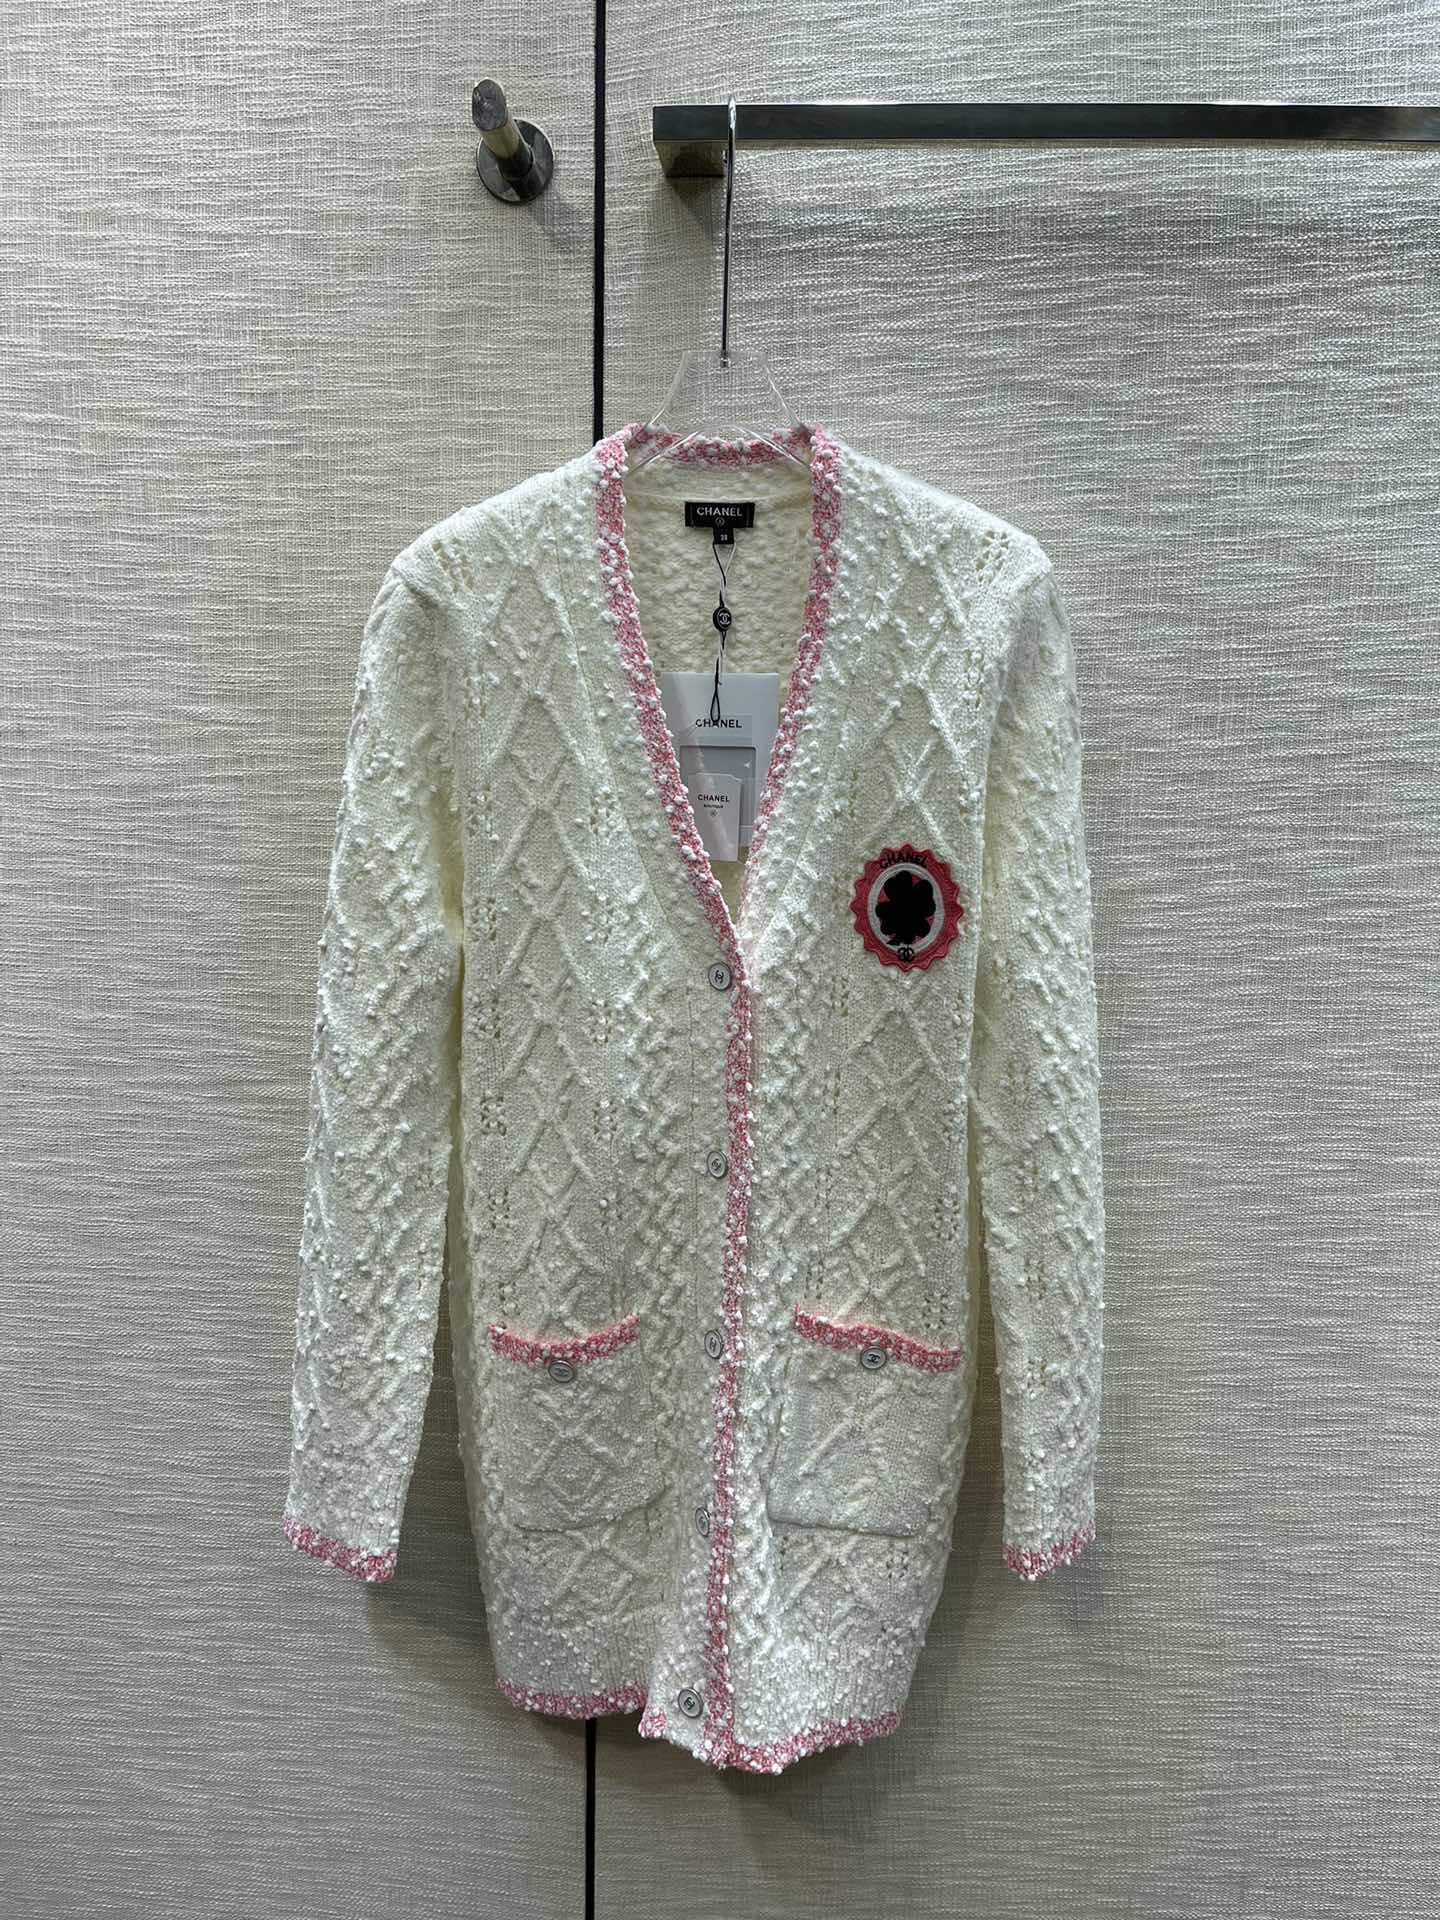 Chanel Clothing Cardigans Openwork Spring Collection